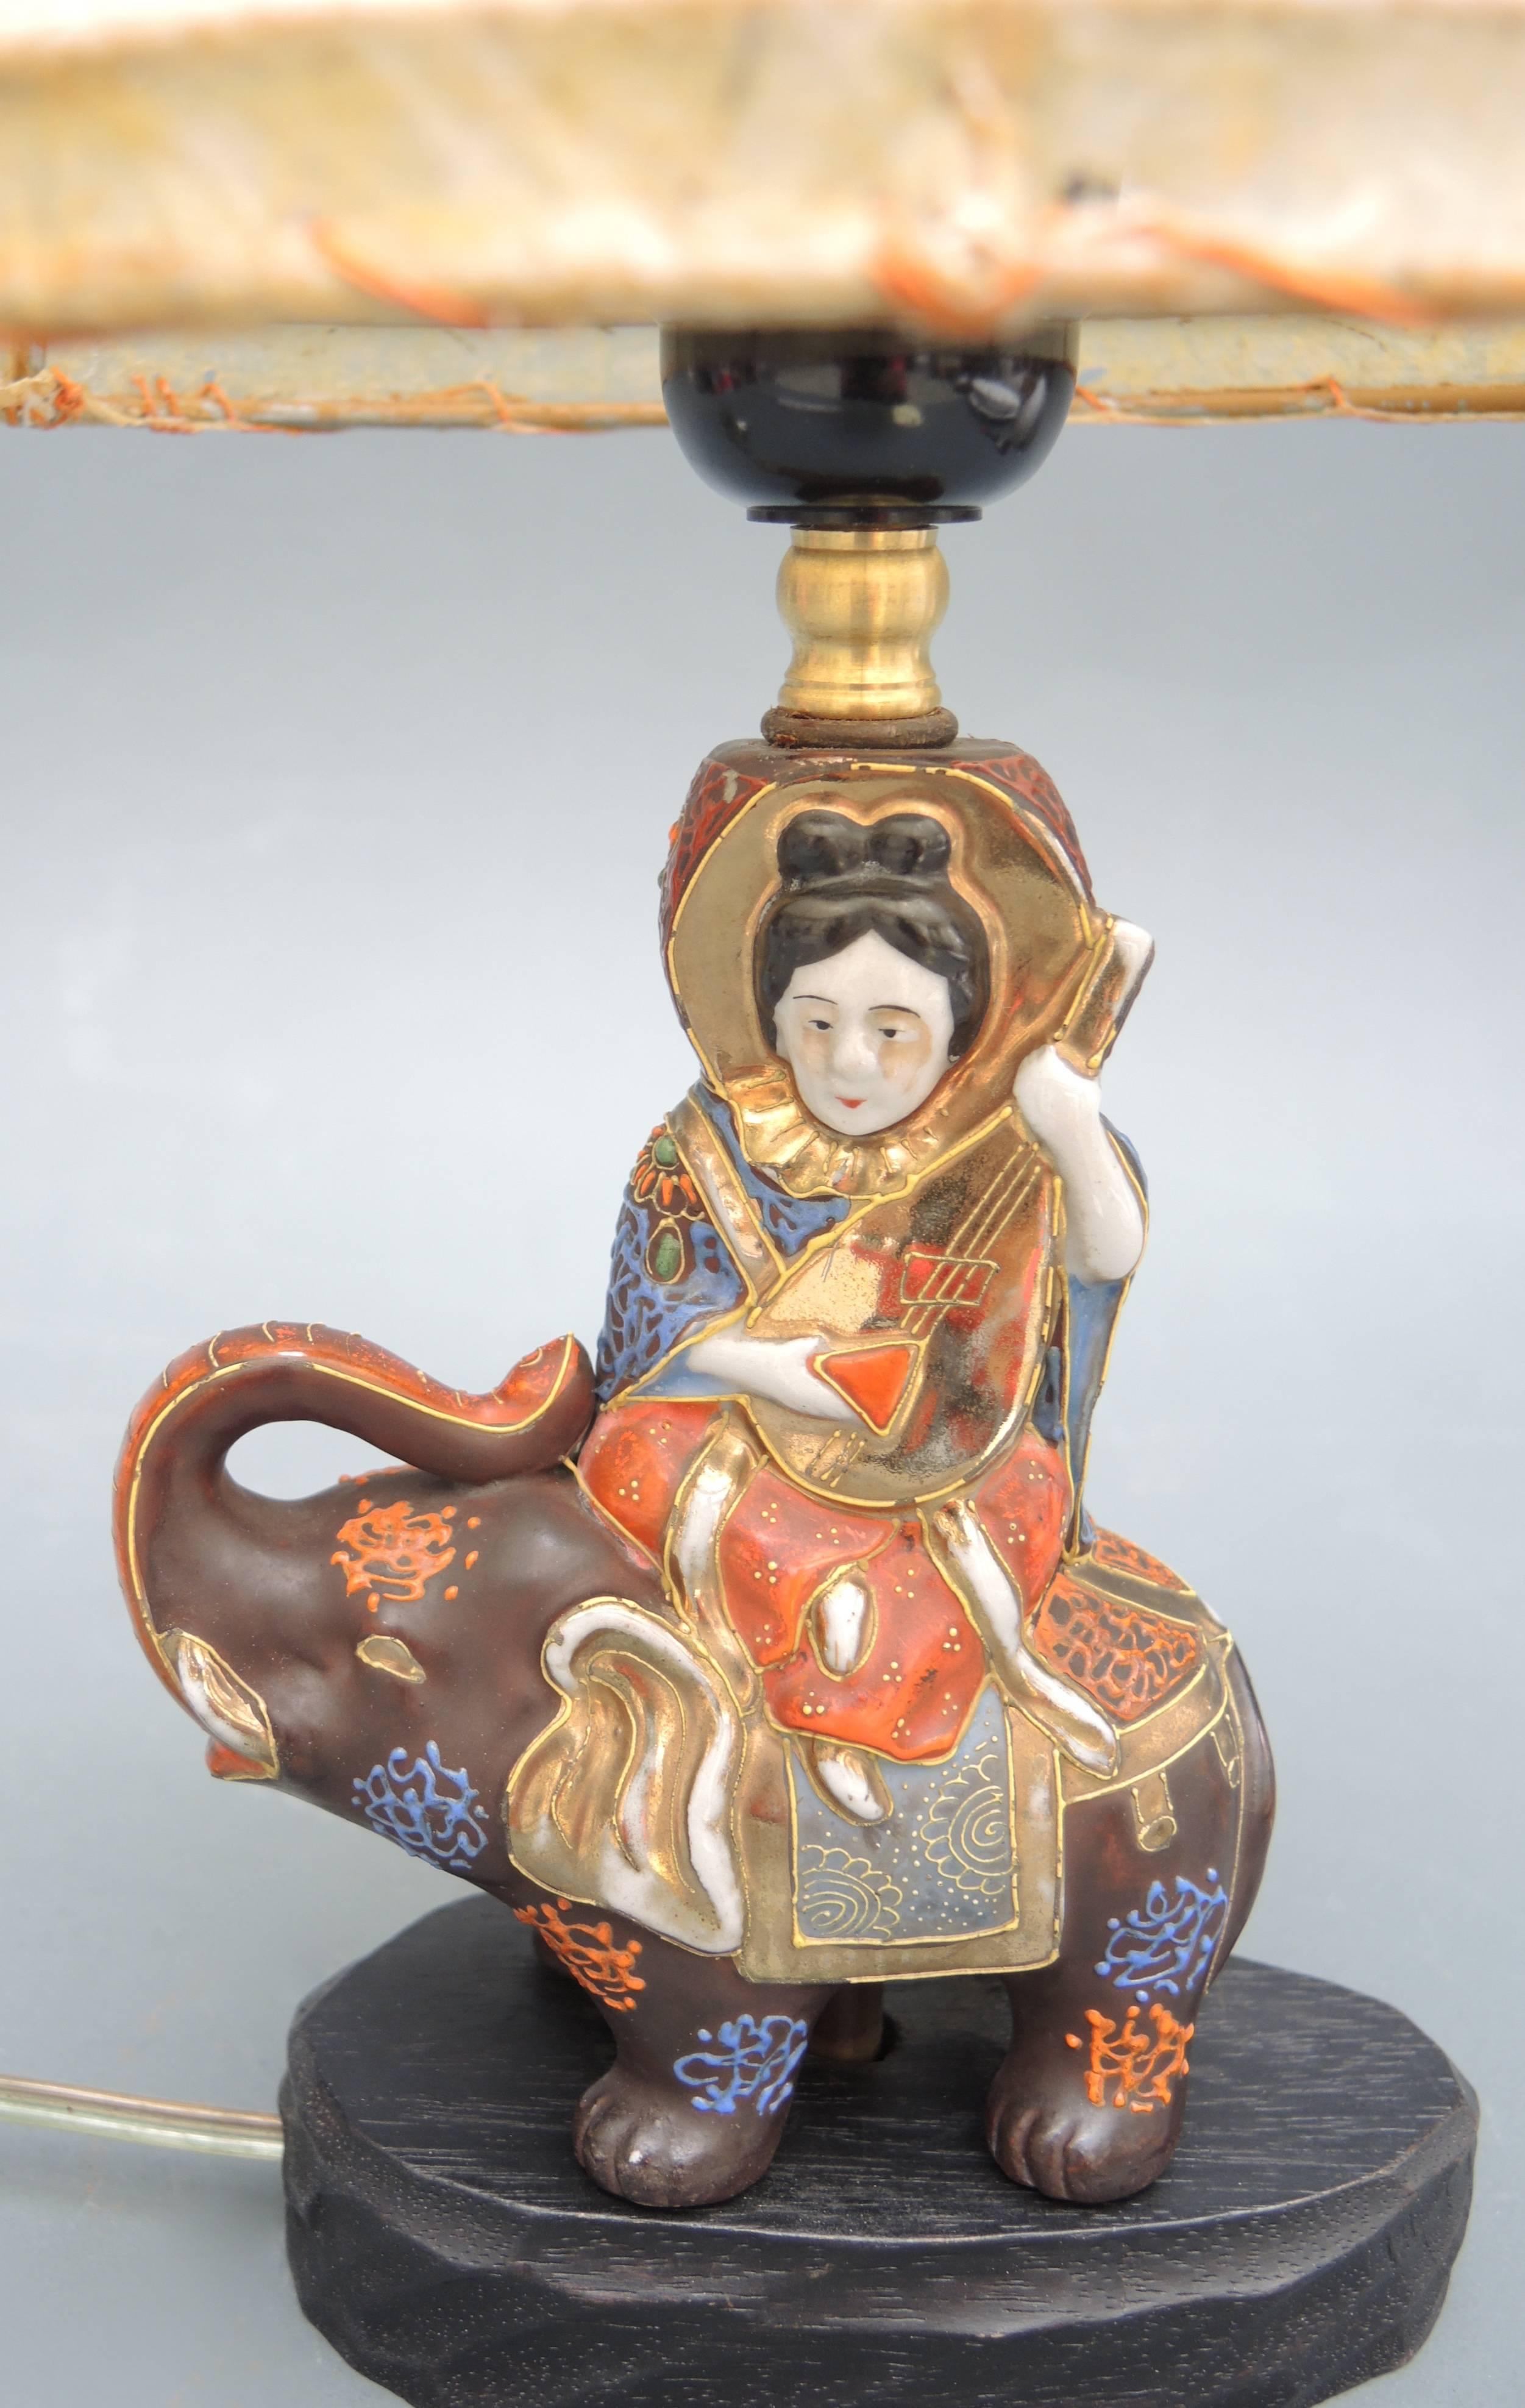 A lovely table lamp made from a small Satsuma porcelain statue of the Goddess Kwan Yin on an elephant and mounted on a wood base. The lamp dates to the early 1940s and retains the original stretched parchment lampshade.
Newly wired and ready to use.